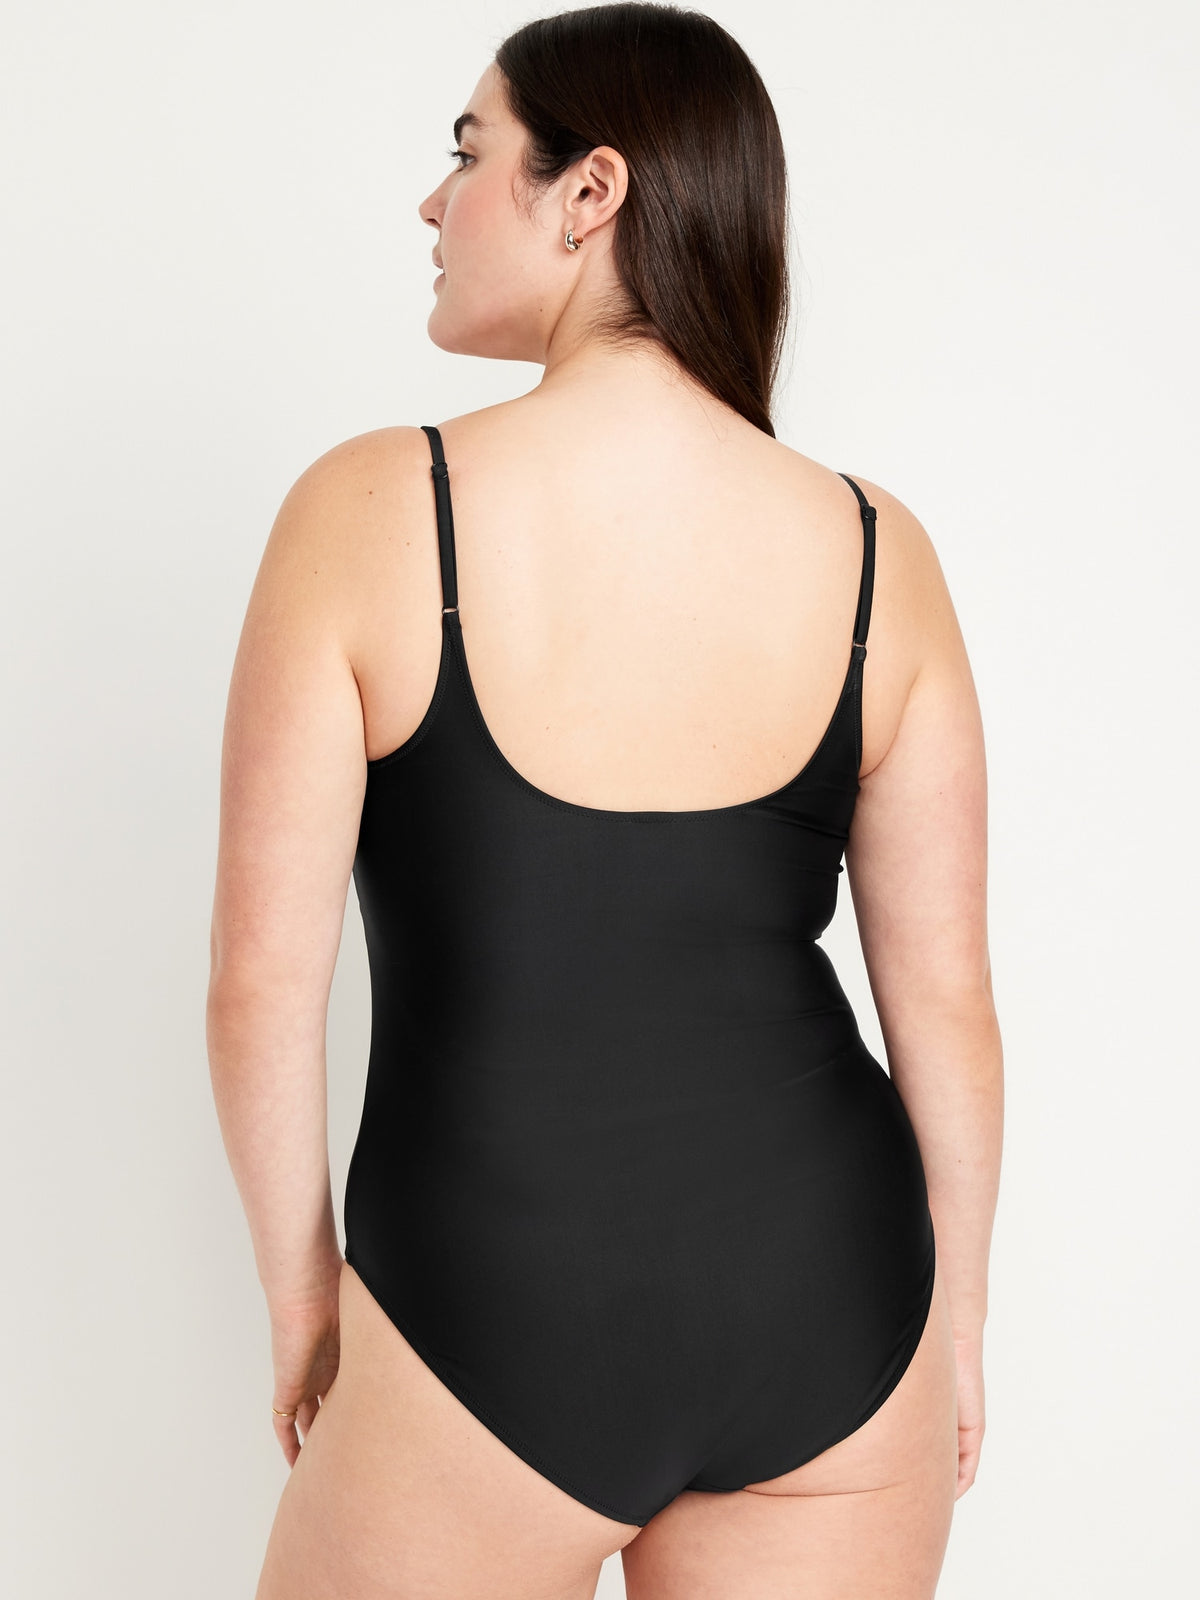 One-Piece Swimsuit for Women